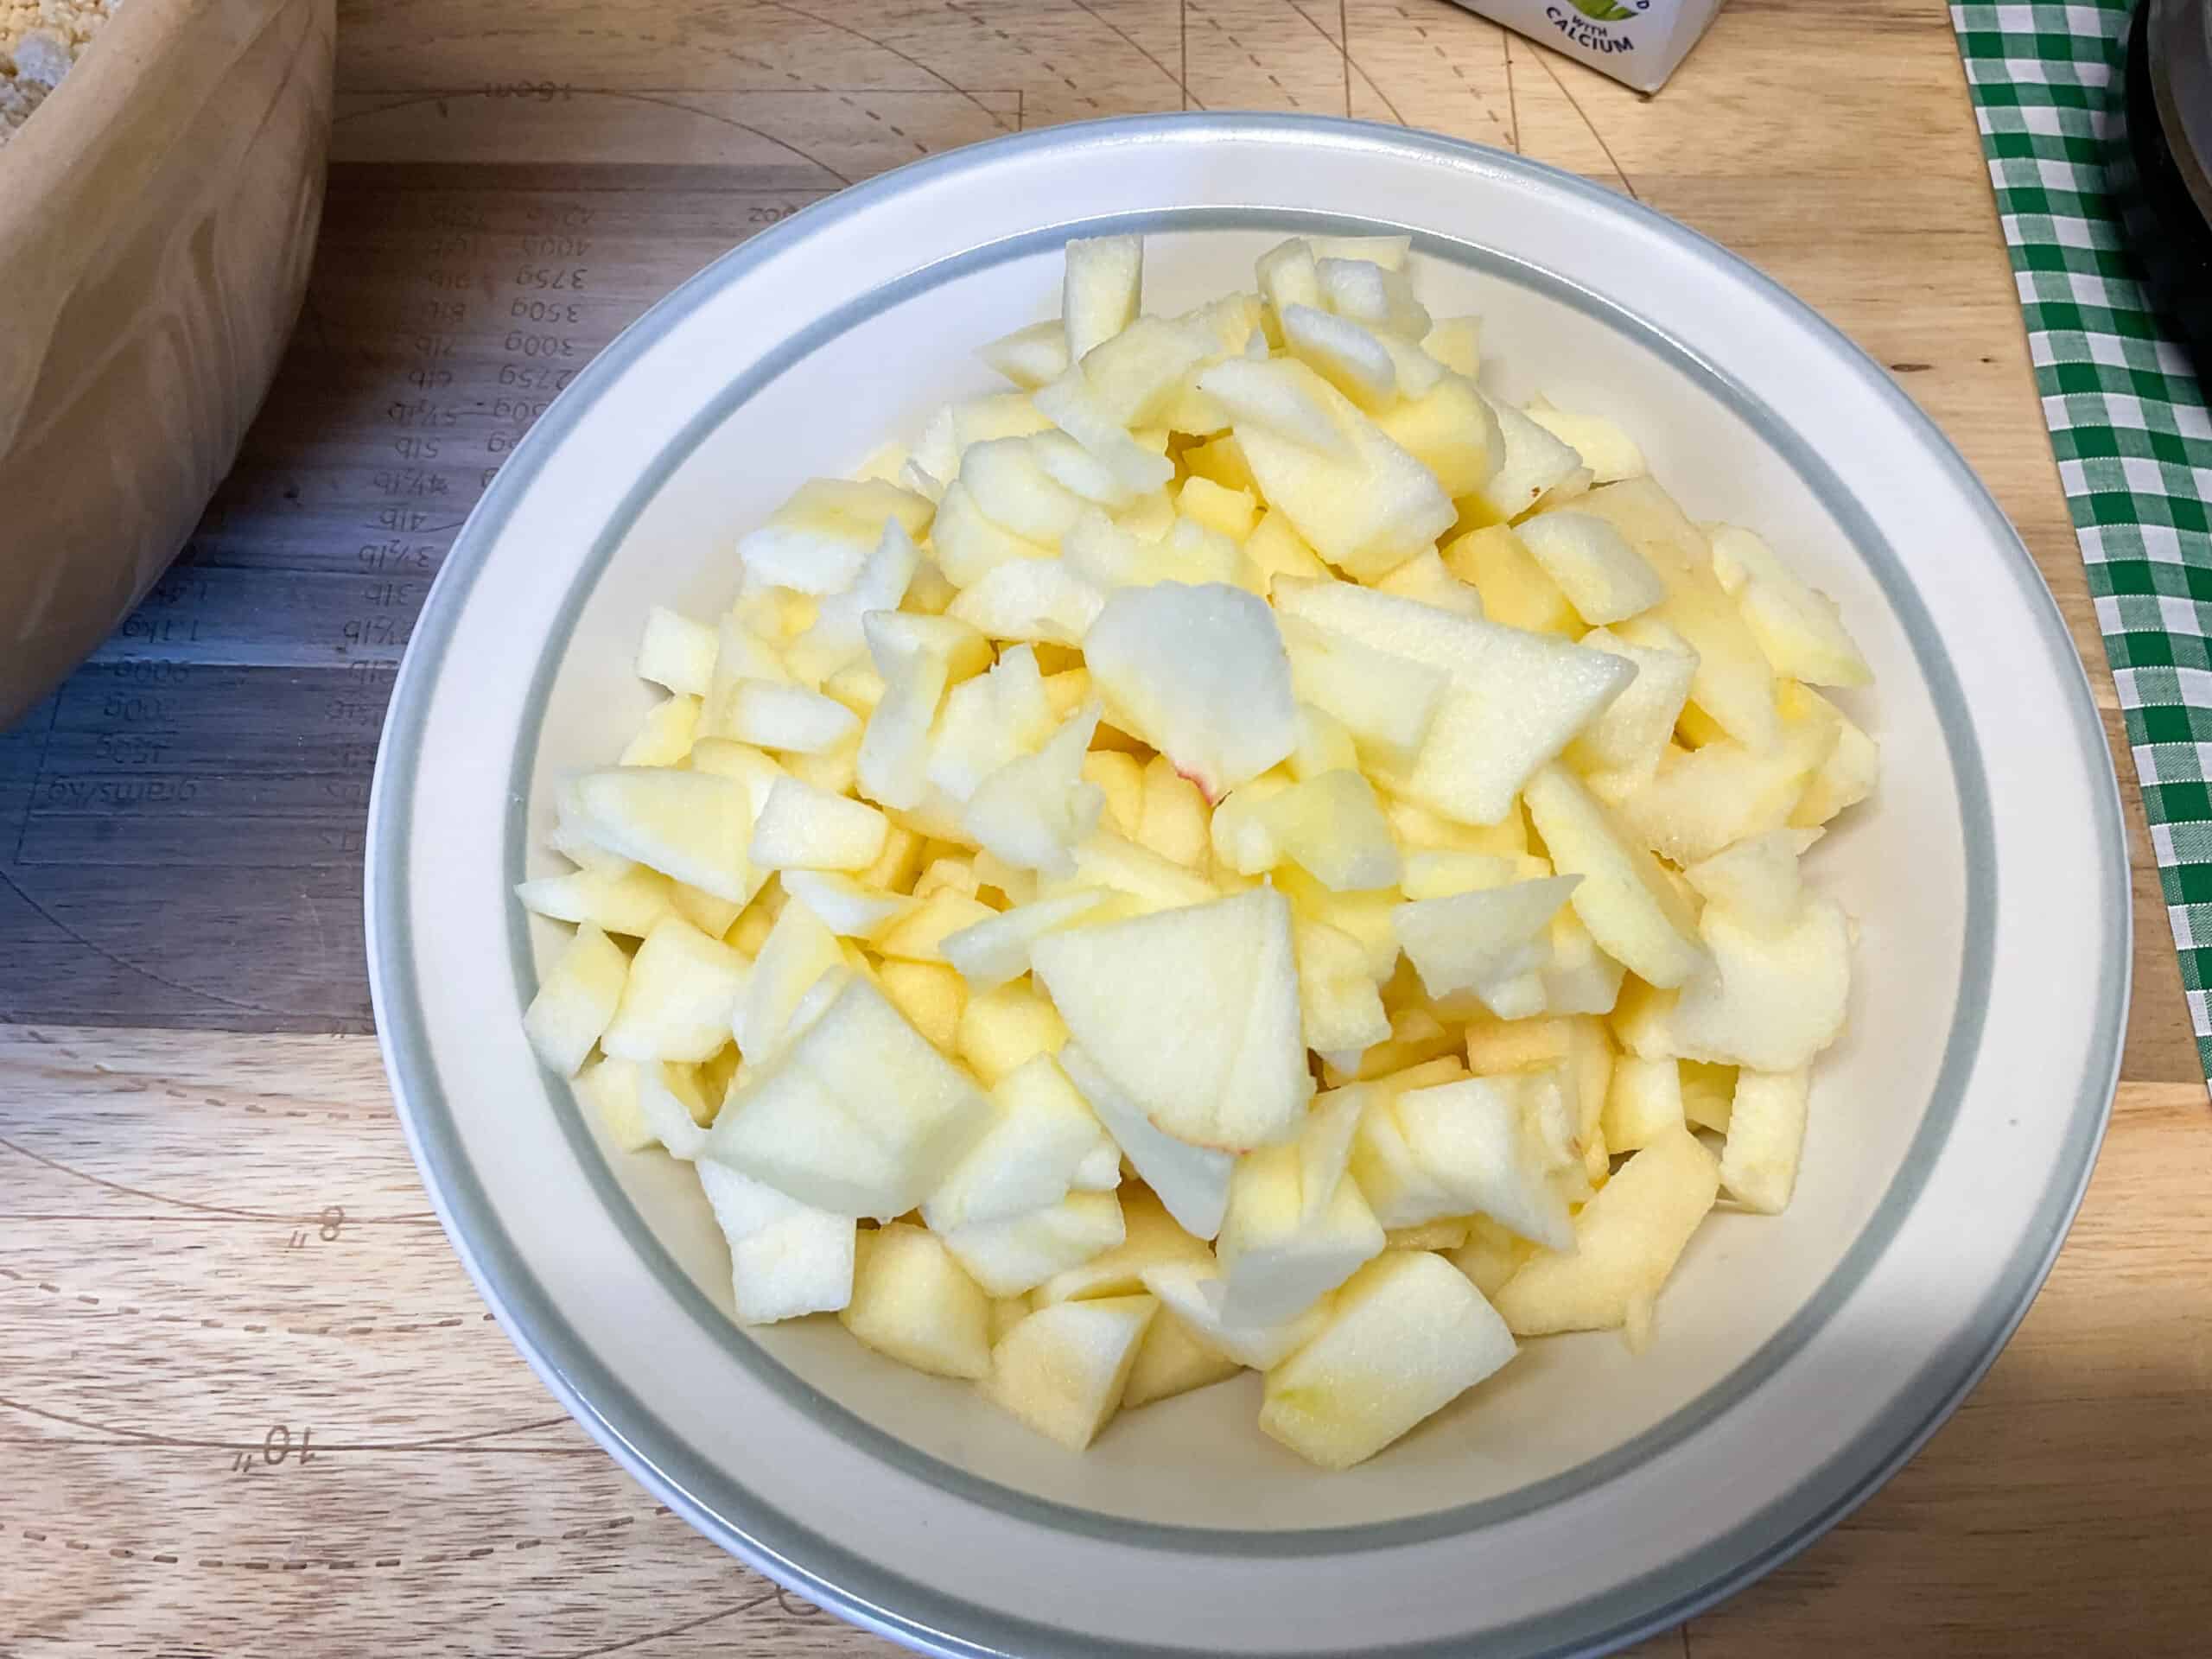 Apples chopped into small pieces in a small bowl.